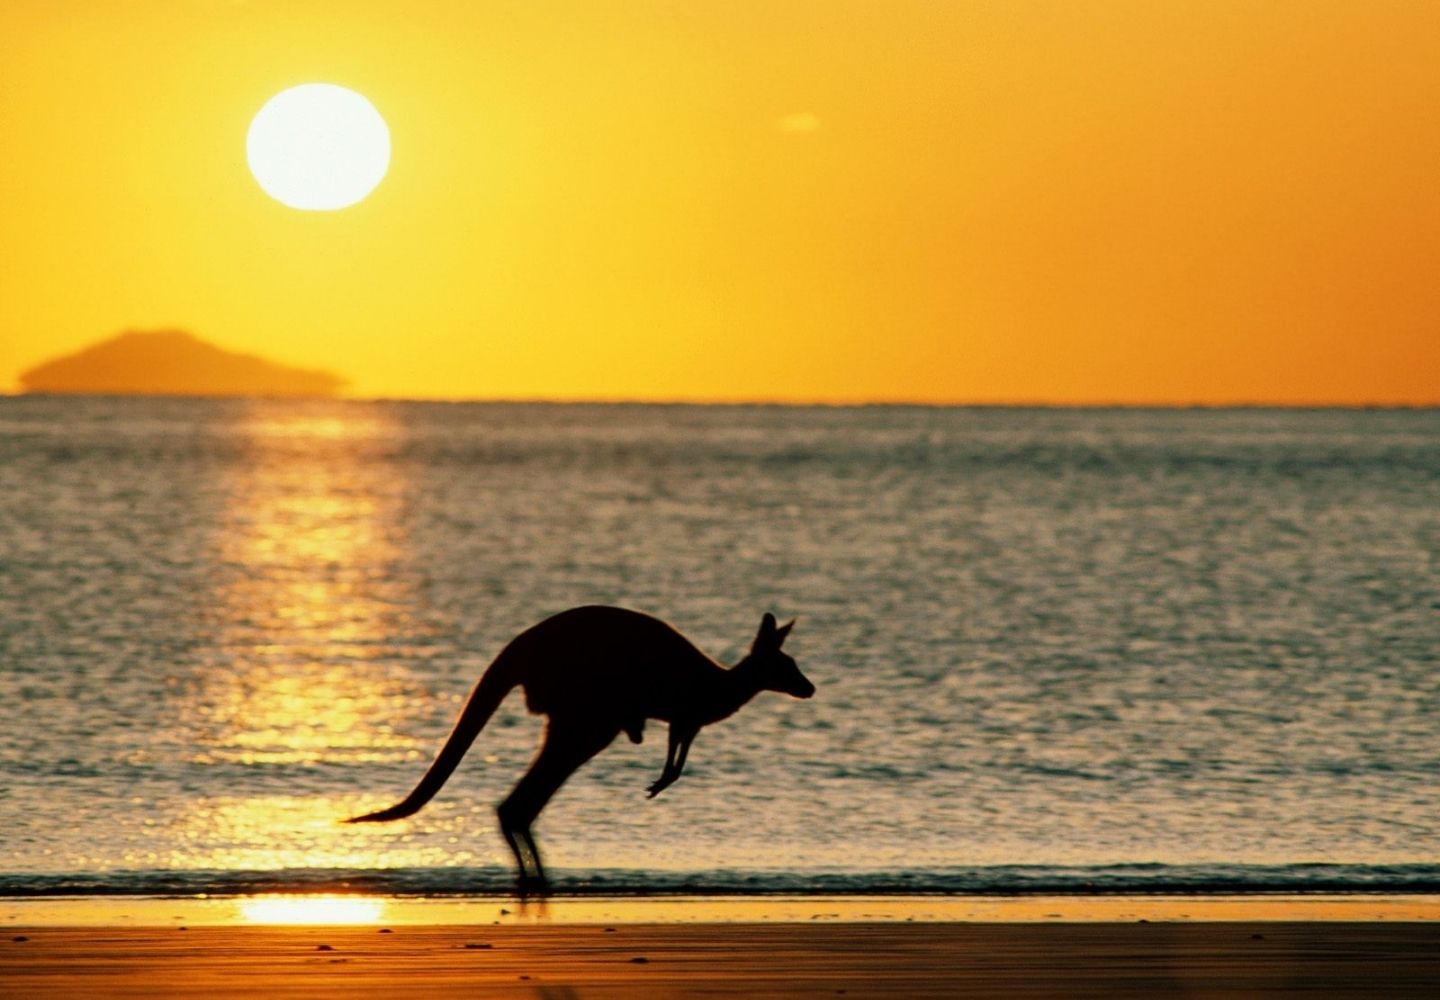 Kangaroo on a beach with ocean in the background at sunset